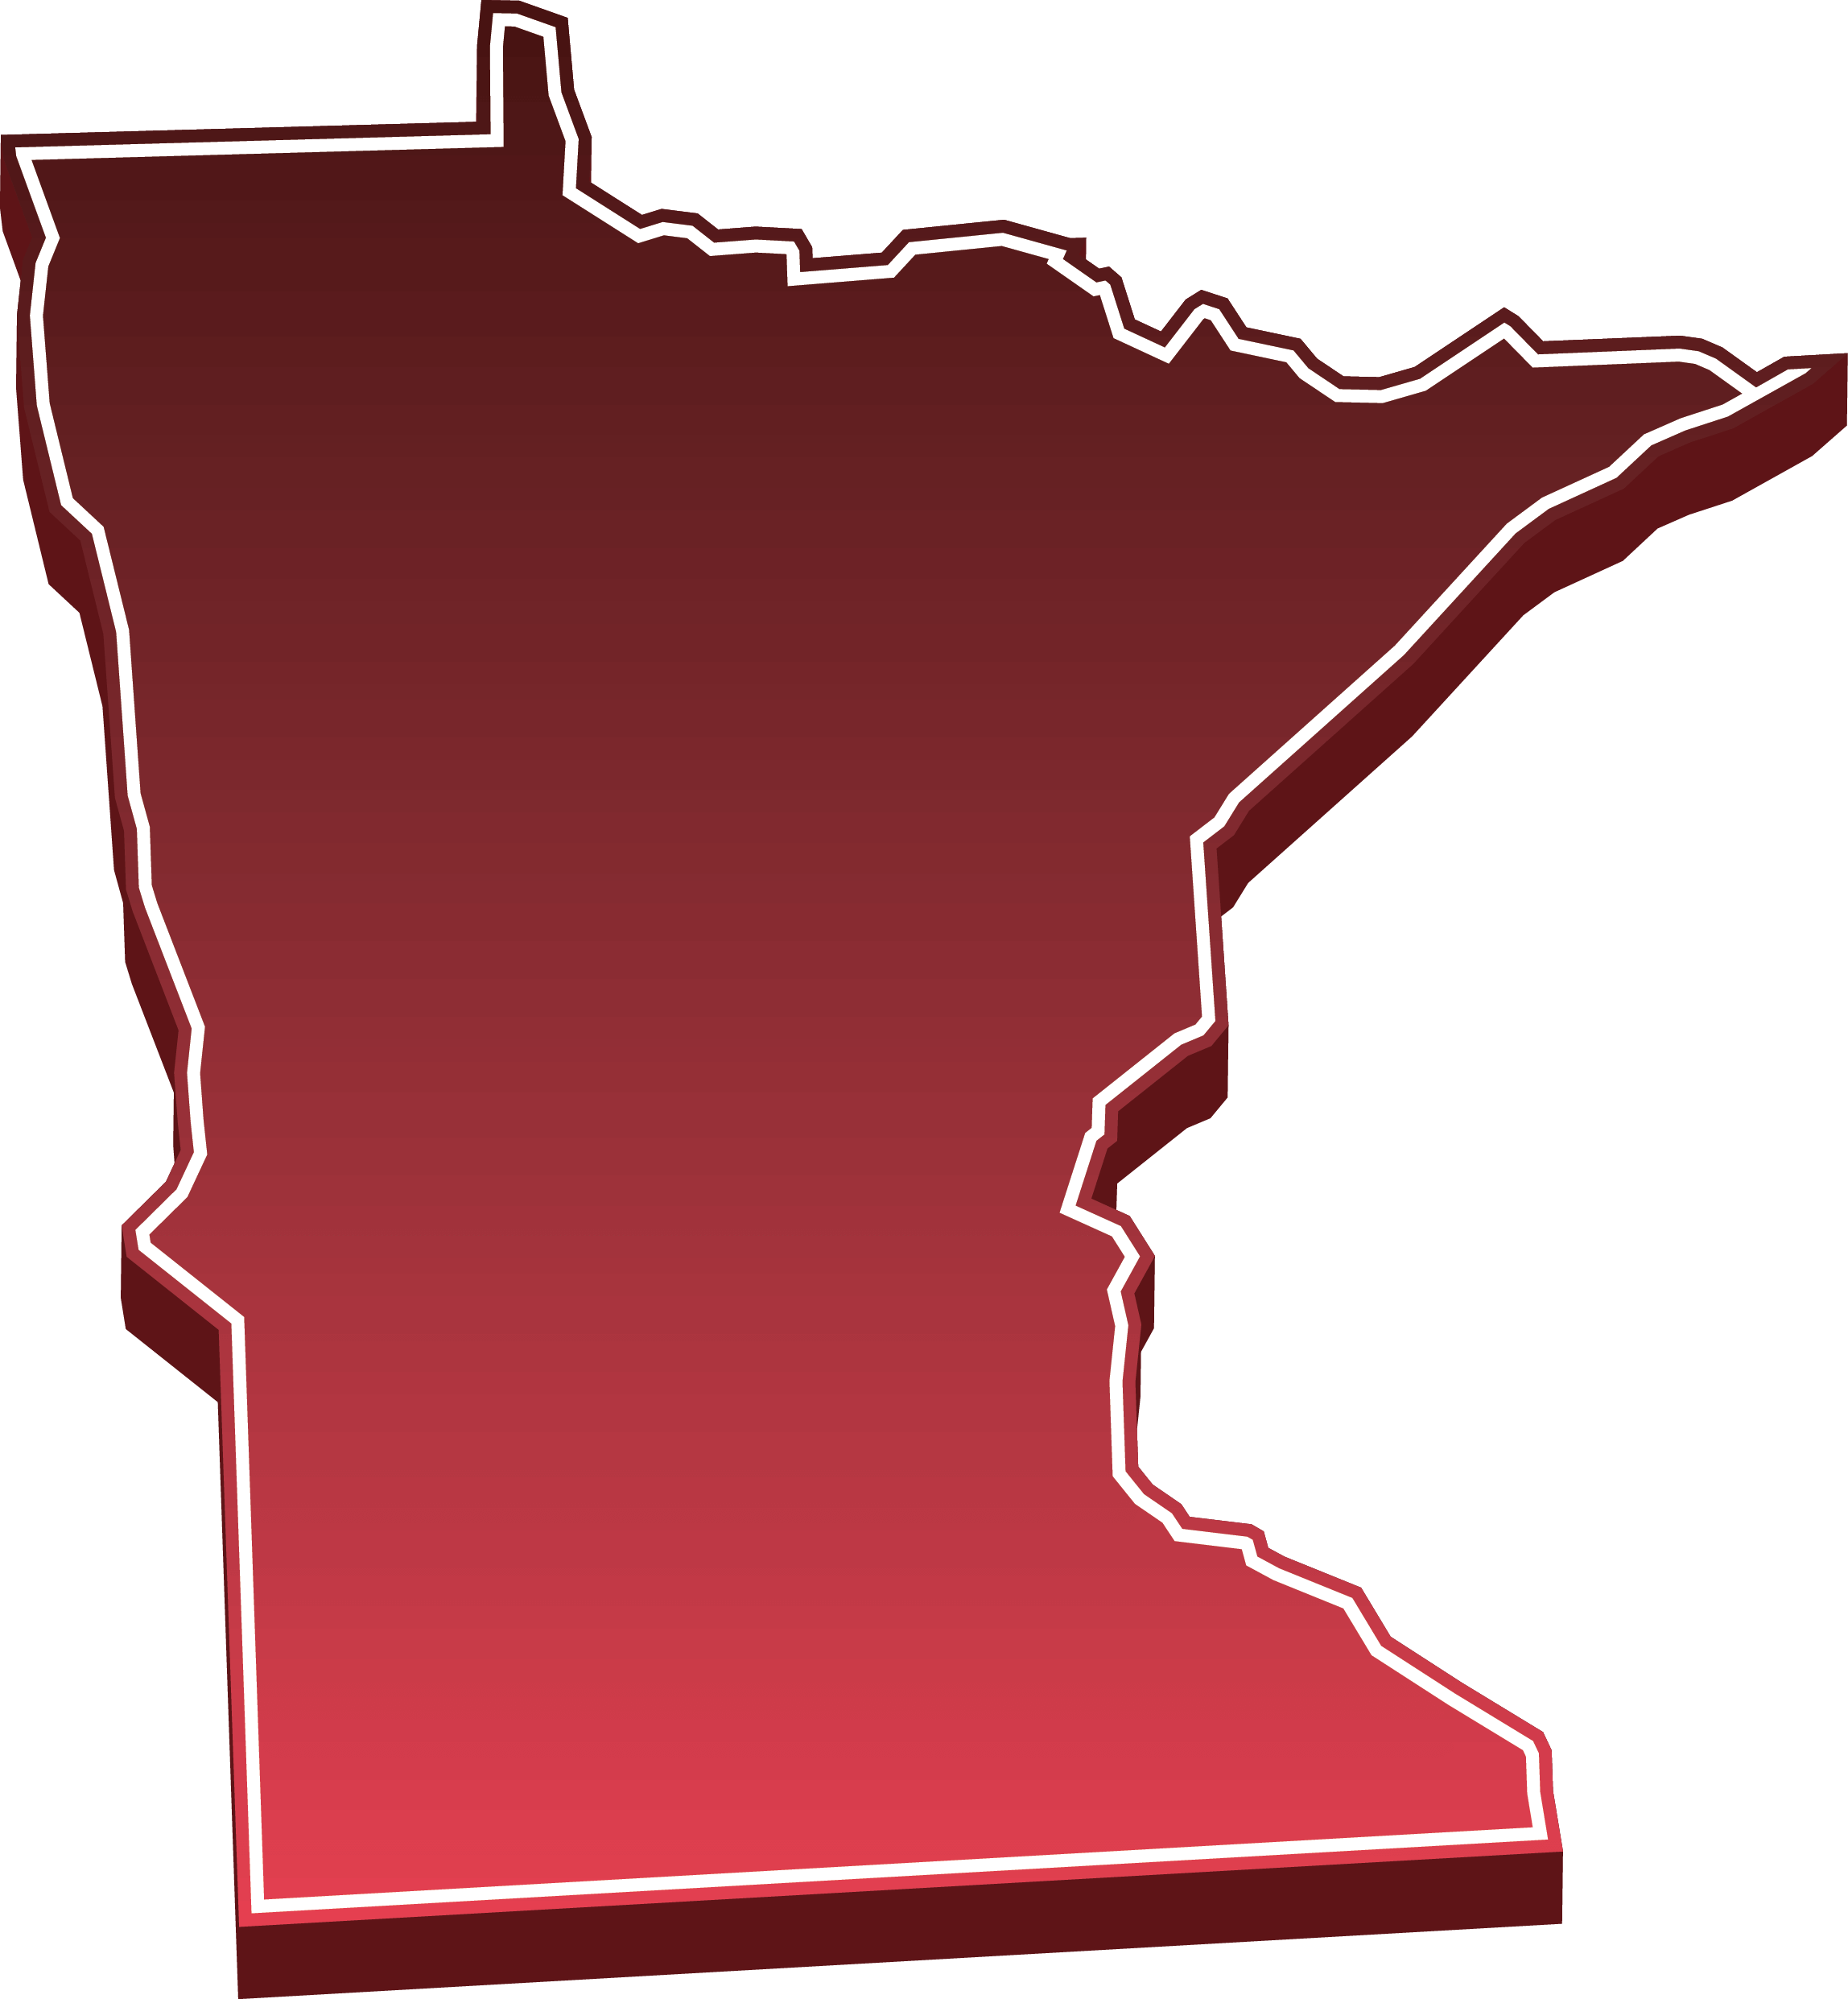 3D Shape of Minnesota colored in red and outlined in white